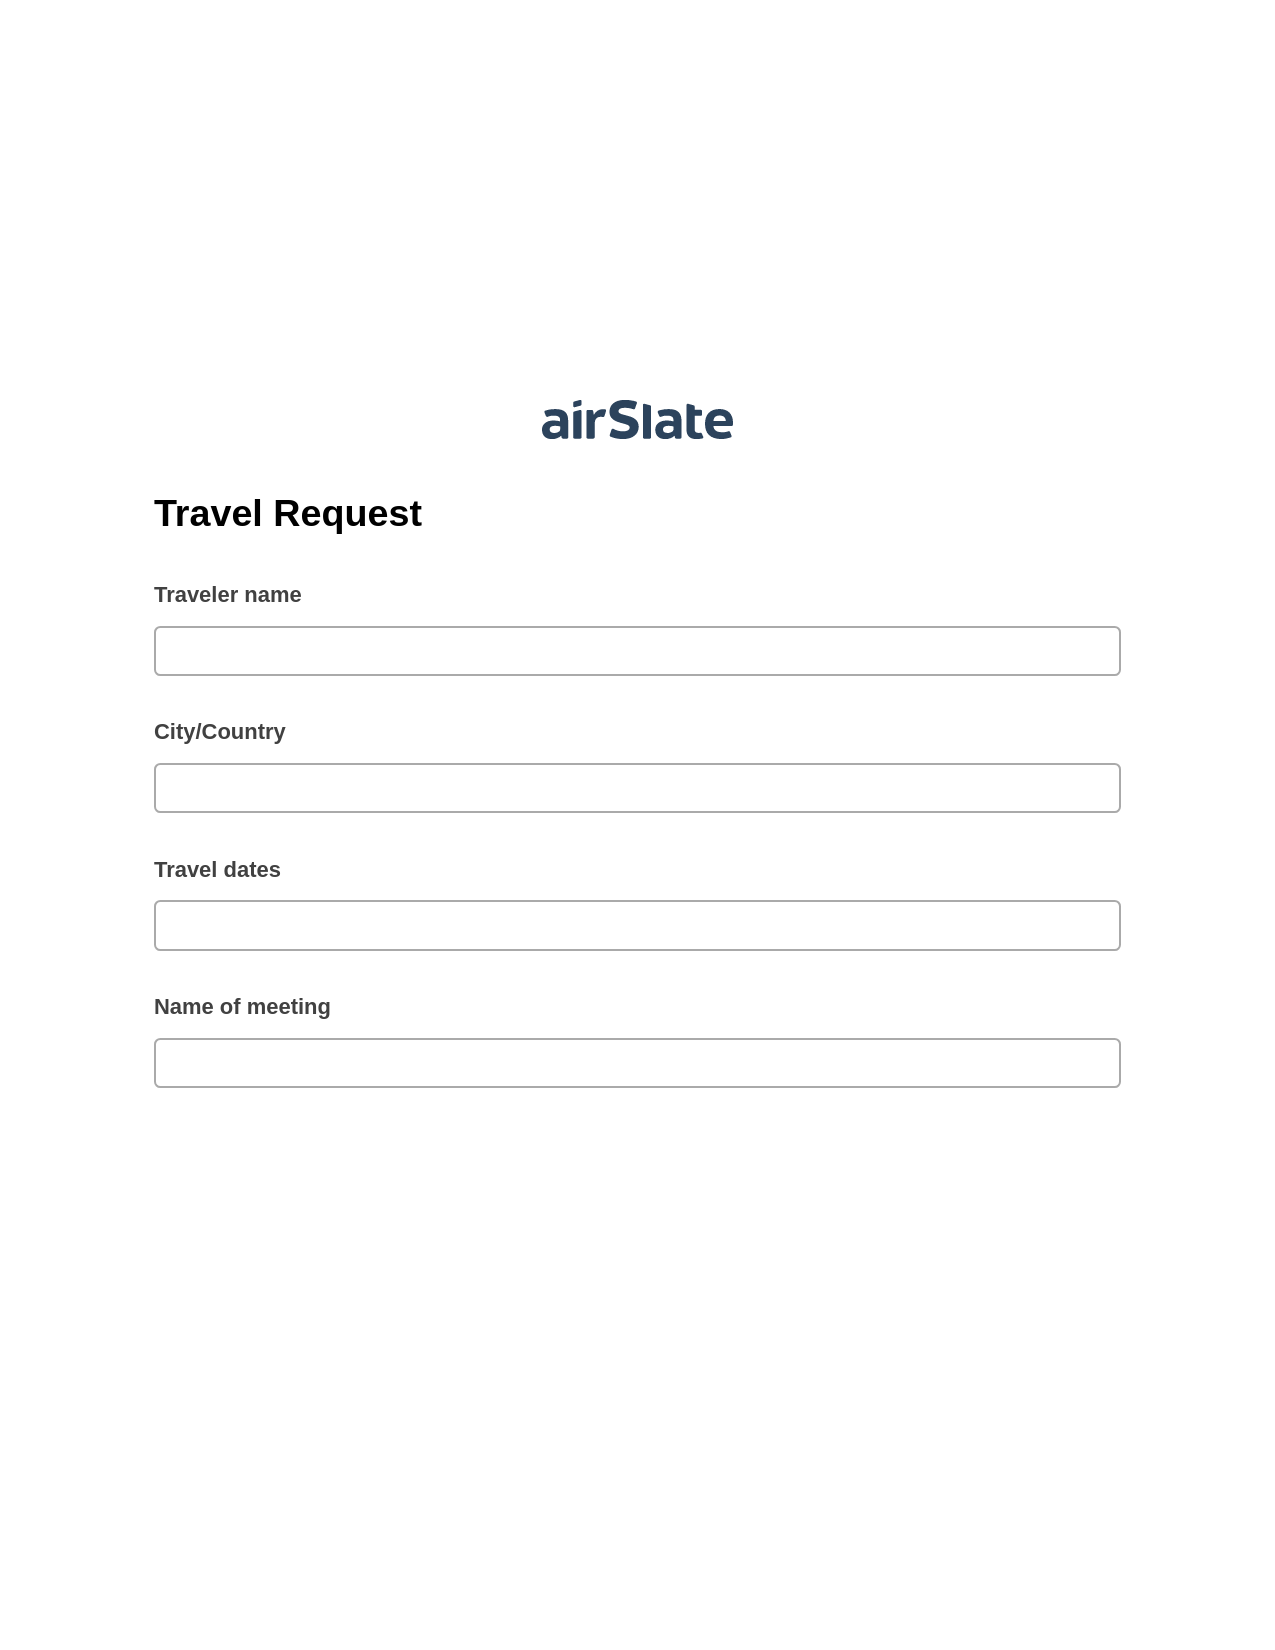 Travel Request Pre-fill Slate from MS Dynamics 365 Records Bot, Create slate addon, Export to Google Sheet Bot